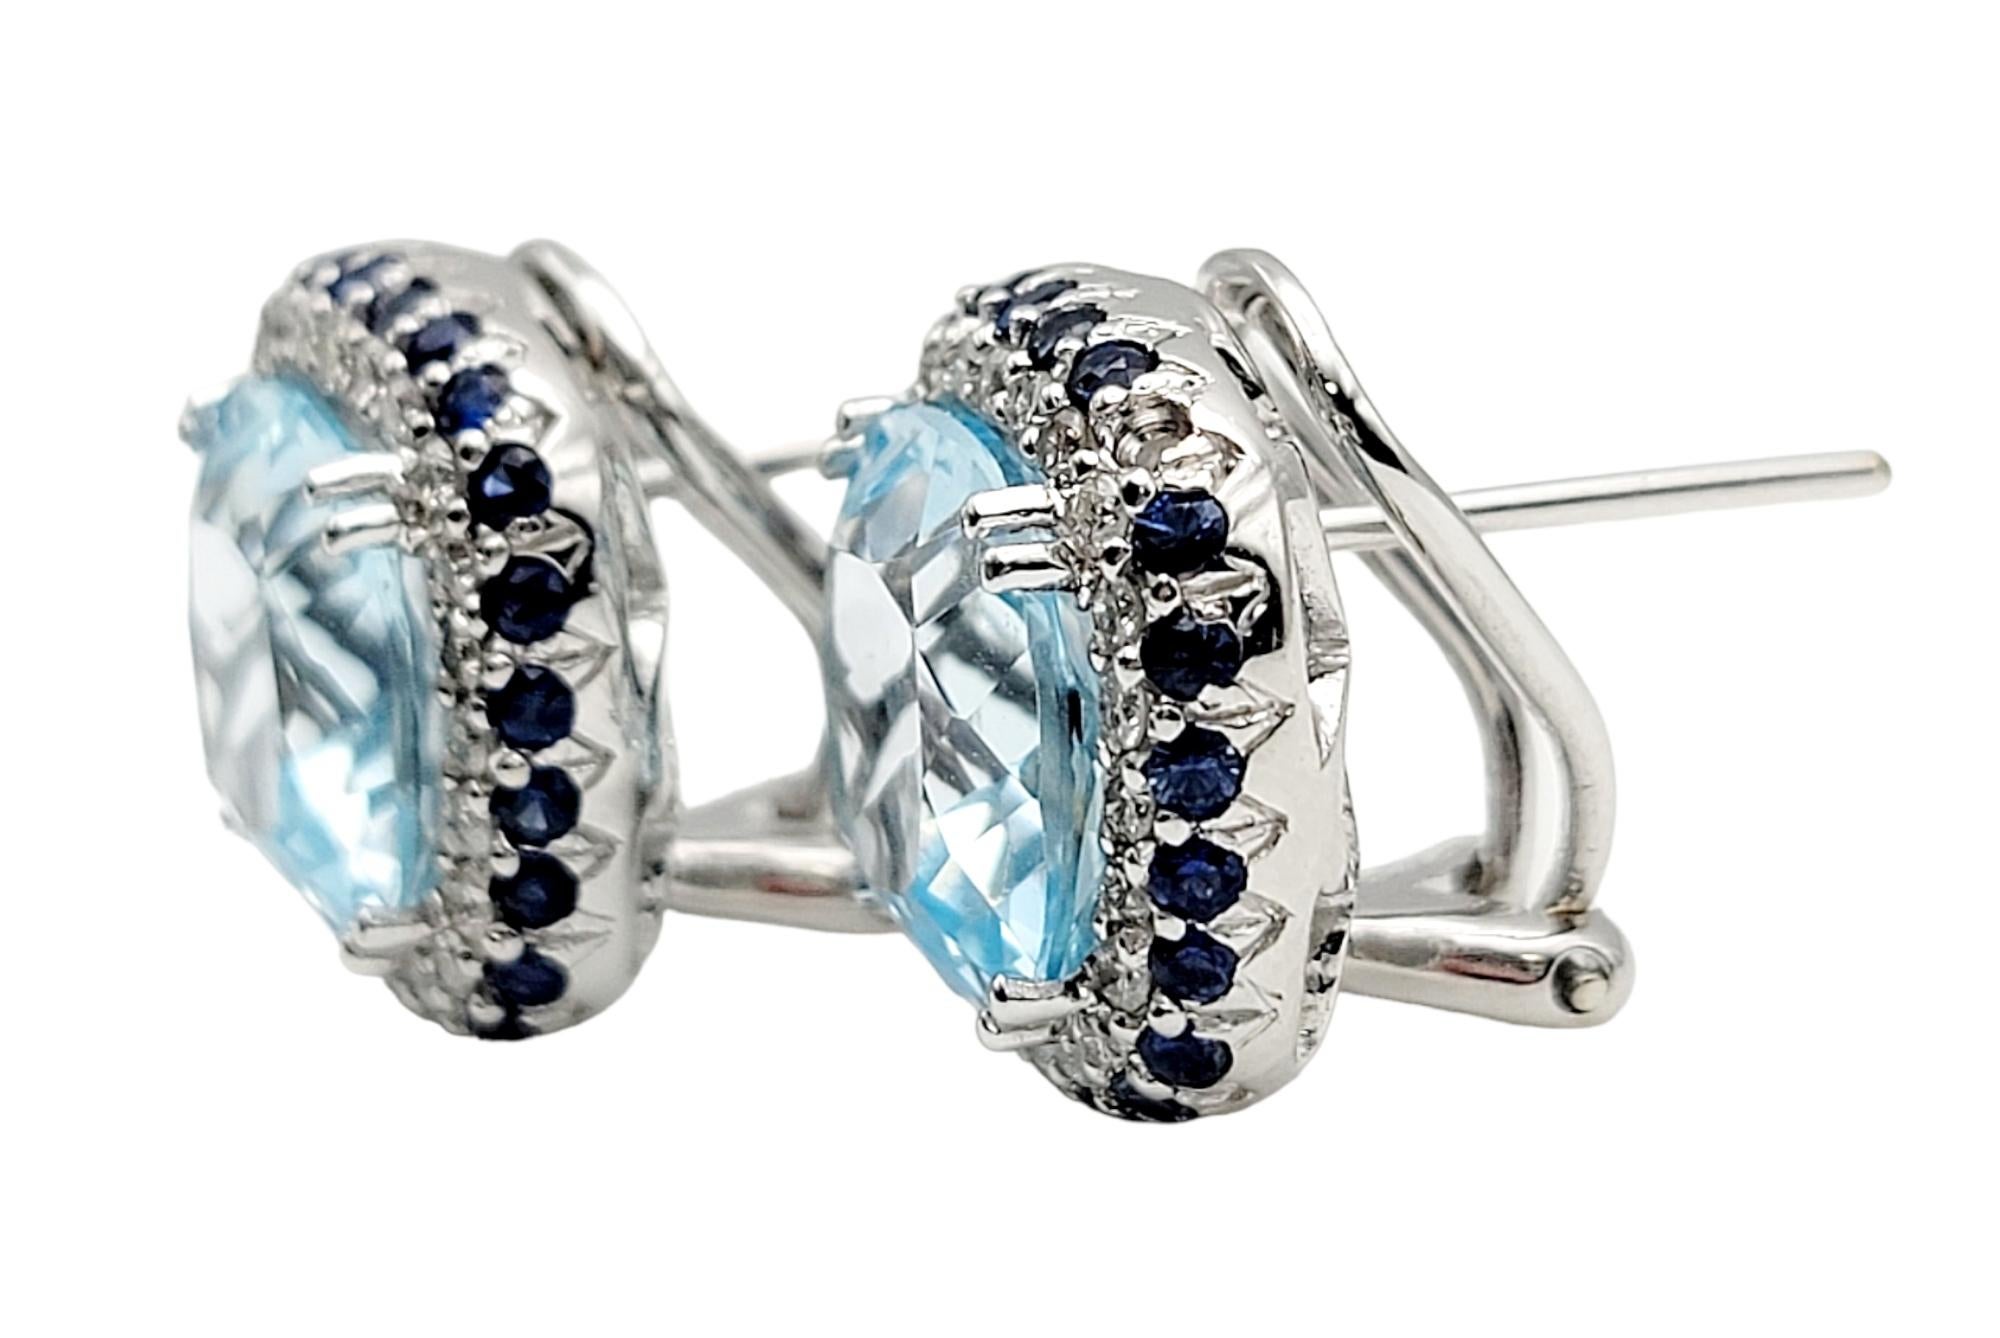 Cushion Cut Blue Topaz, Diamond, & Sapphire Stud Earrings in 14 Karat White Gold In Excellent Condition For Sale In Scottsdale, AZ